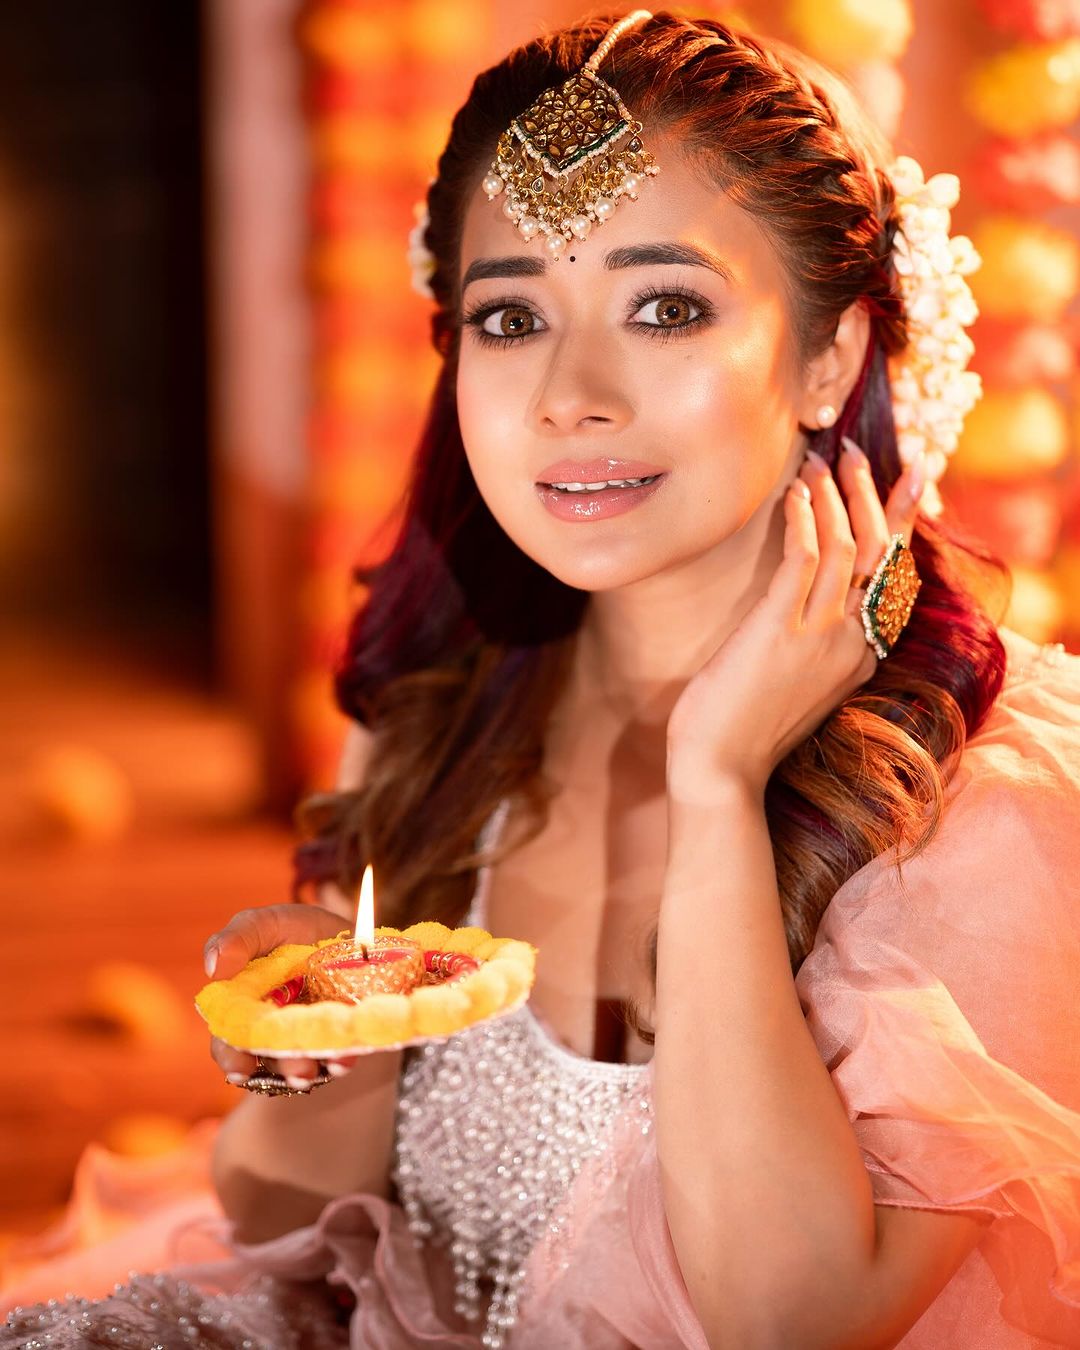 Adorable Tina Datta steals The Hearts Of Many On Her Traditional Look For The Grand Inauguration Of Ram Mandir!